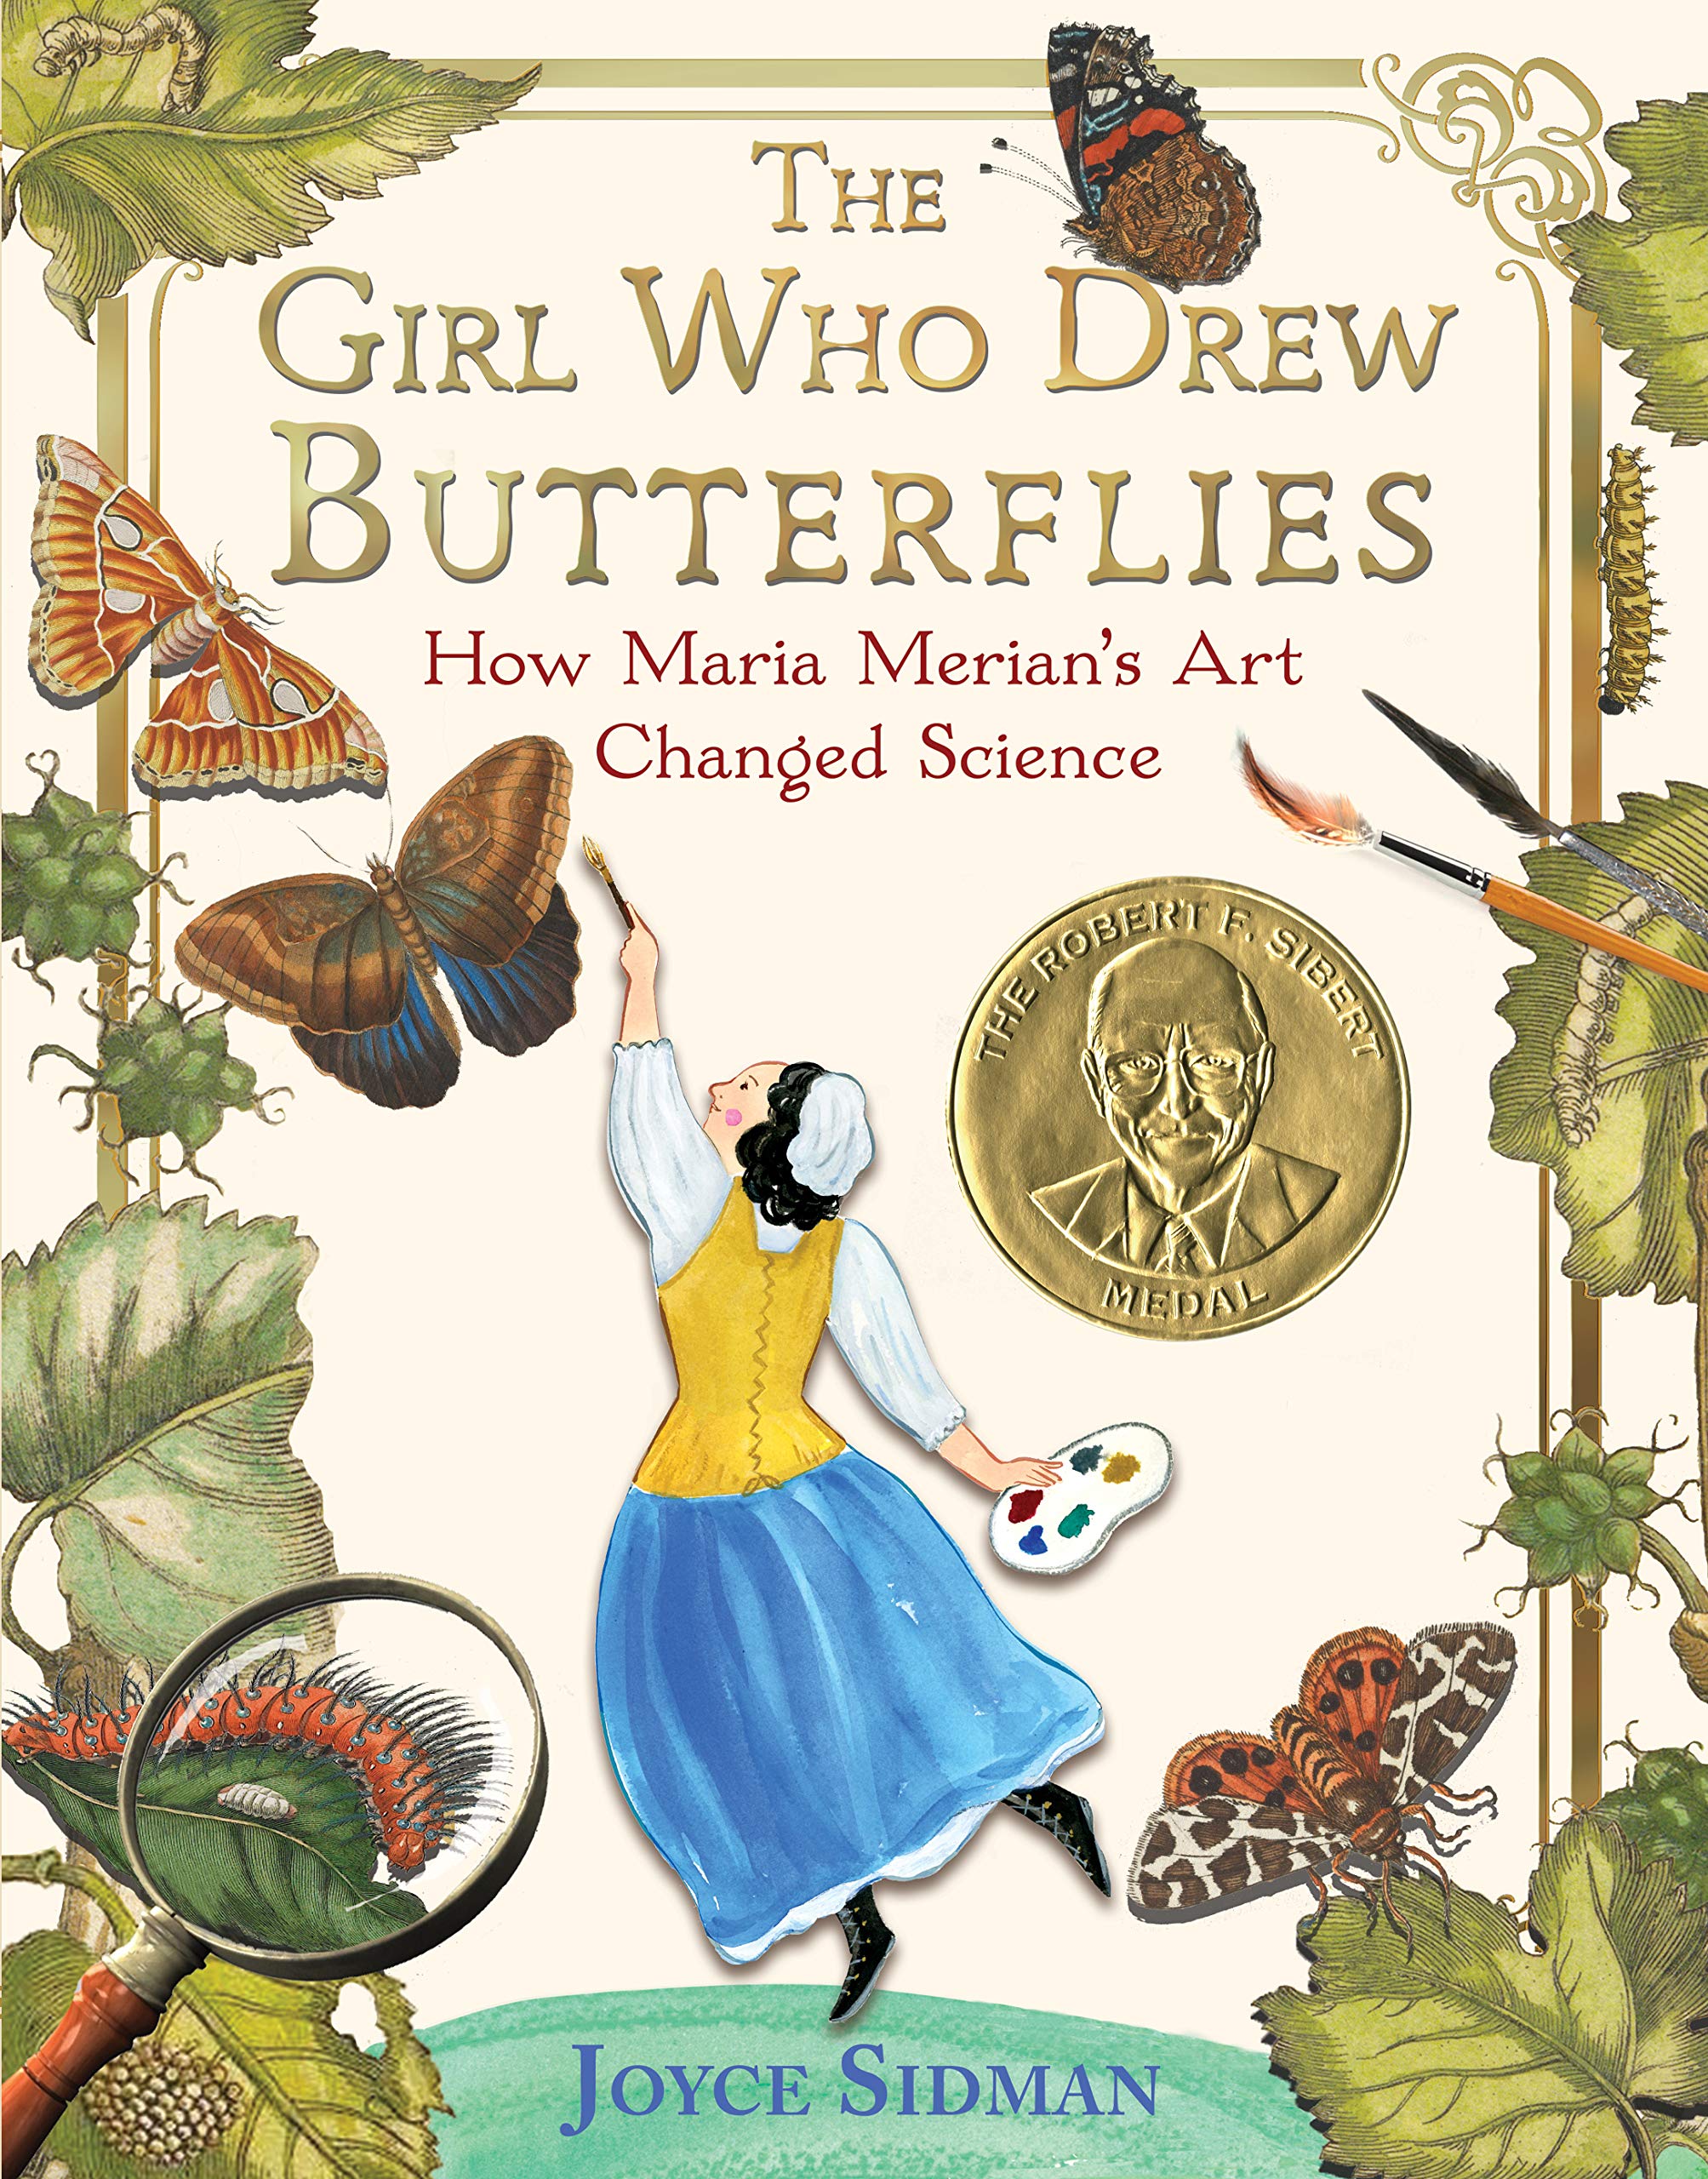 The Girl Who Drew Butterflies—How Maria Merian’s Art Changed Science